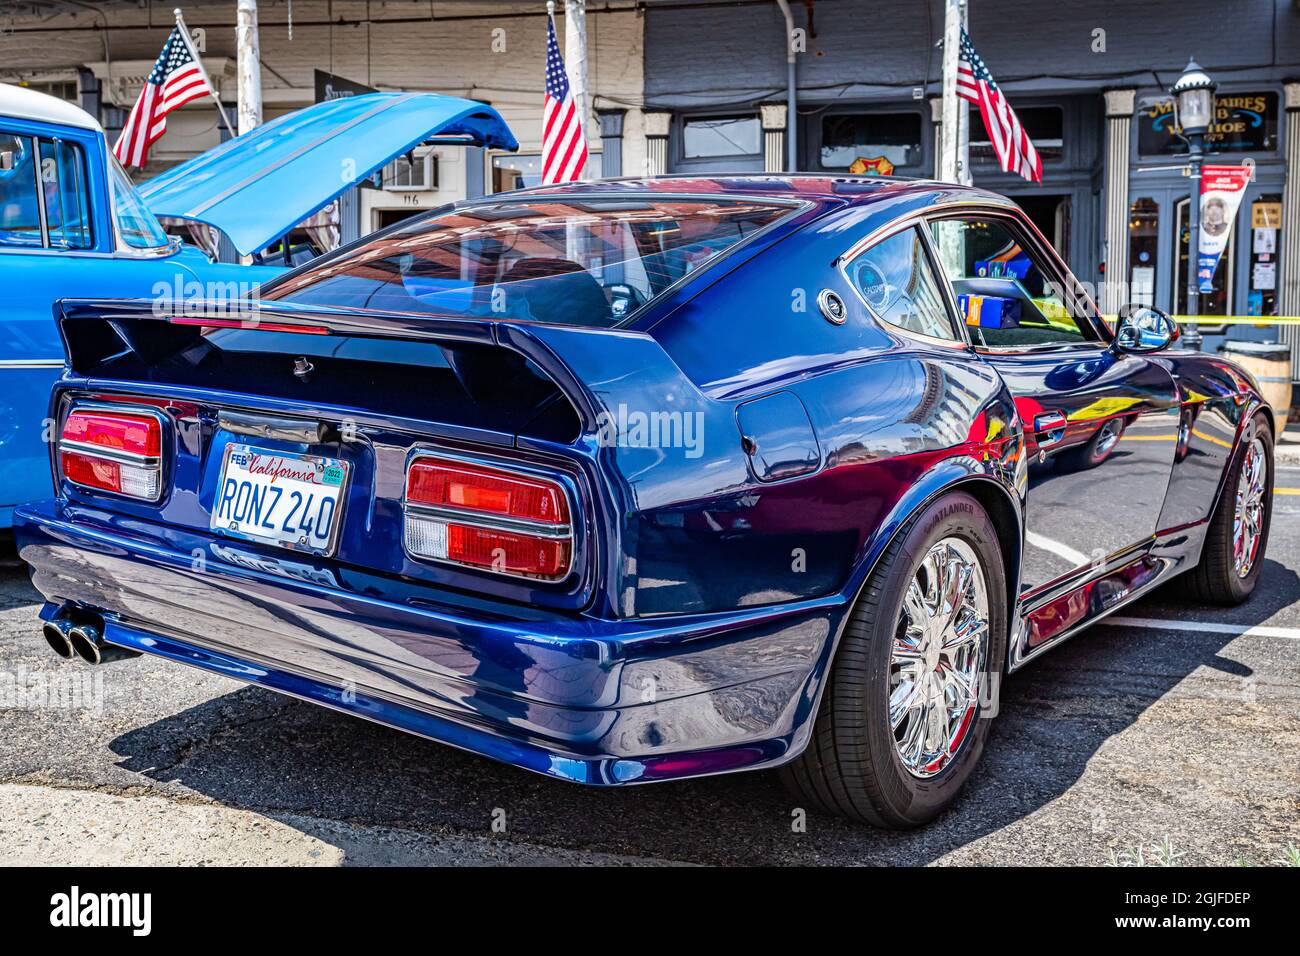 Virginia City, NV - July 30, 2021: 1973 Datsun 240Z coupe at a local car show. Stock Photo